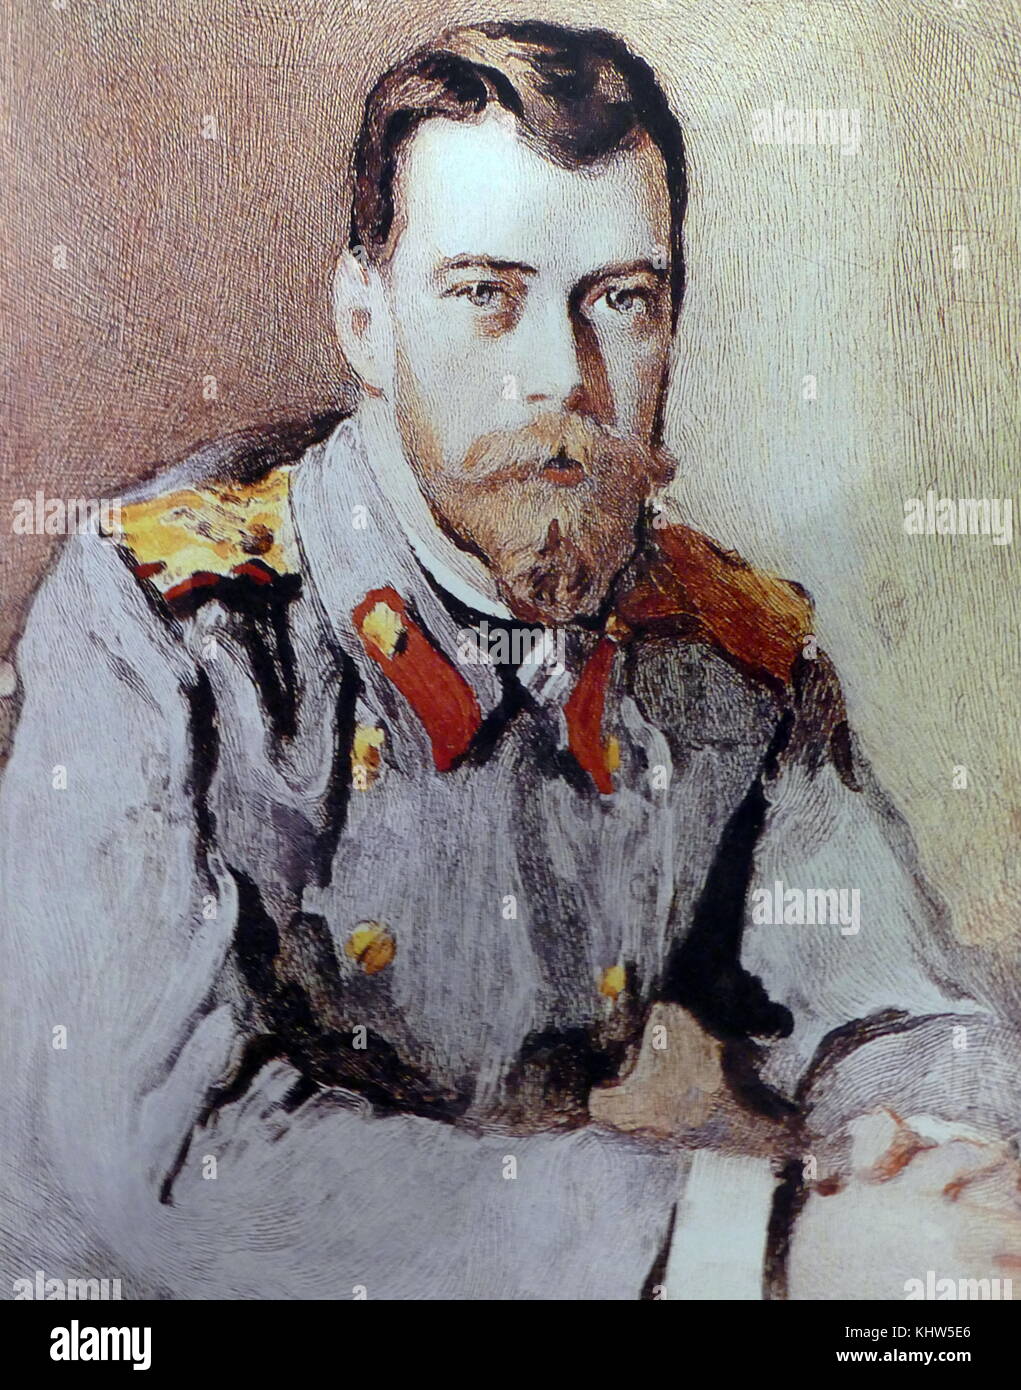 Portrait of Grand Duke Nikolai Nikolaevich of Russia (1856-1929) a Russian General during Word War I and Commander in Chief of the Russian Army. Dated 19th Century Stock Photo